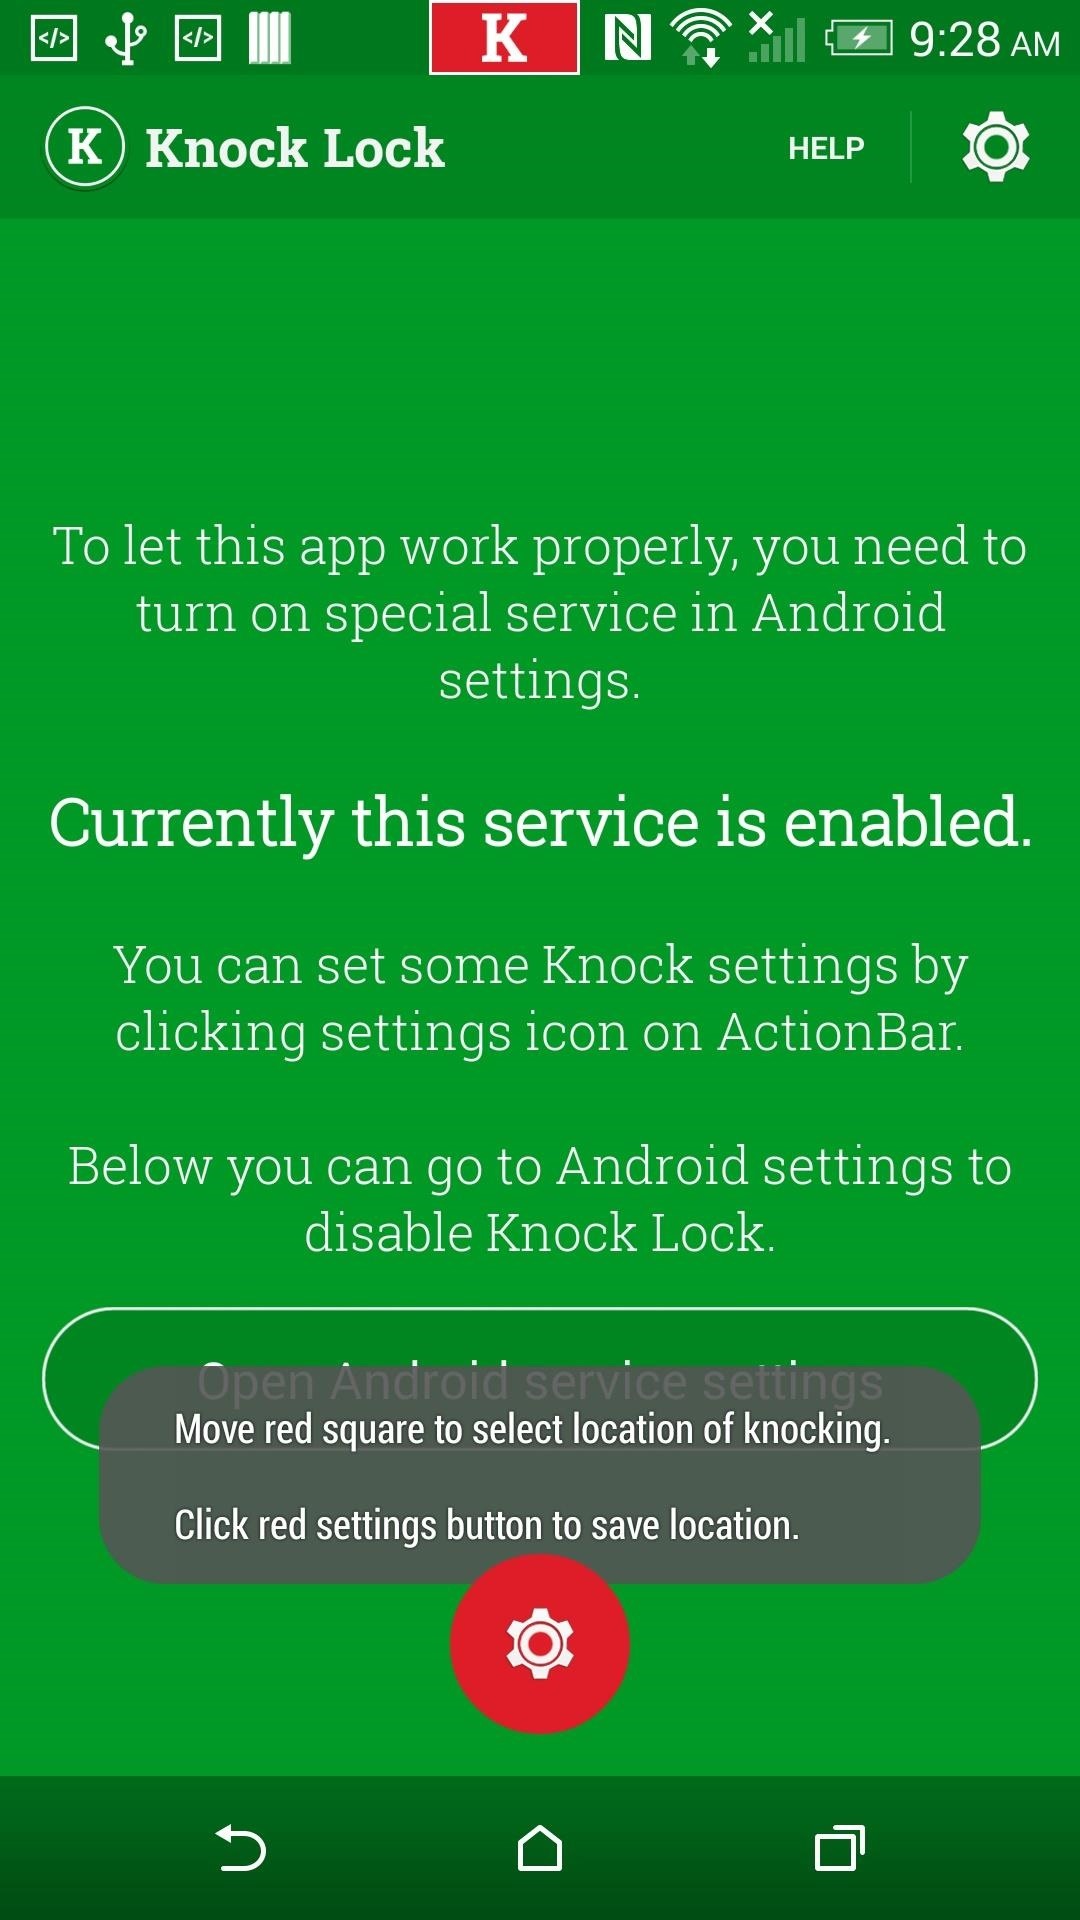 How to Add the "Knock Off" Feature to Your HTC One M8 Without Rooting